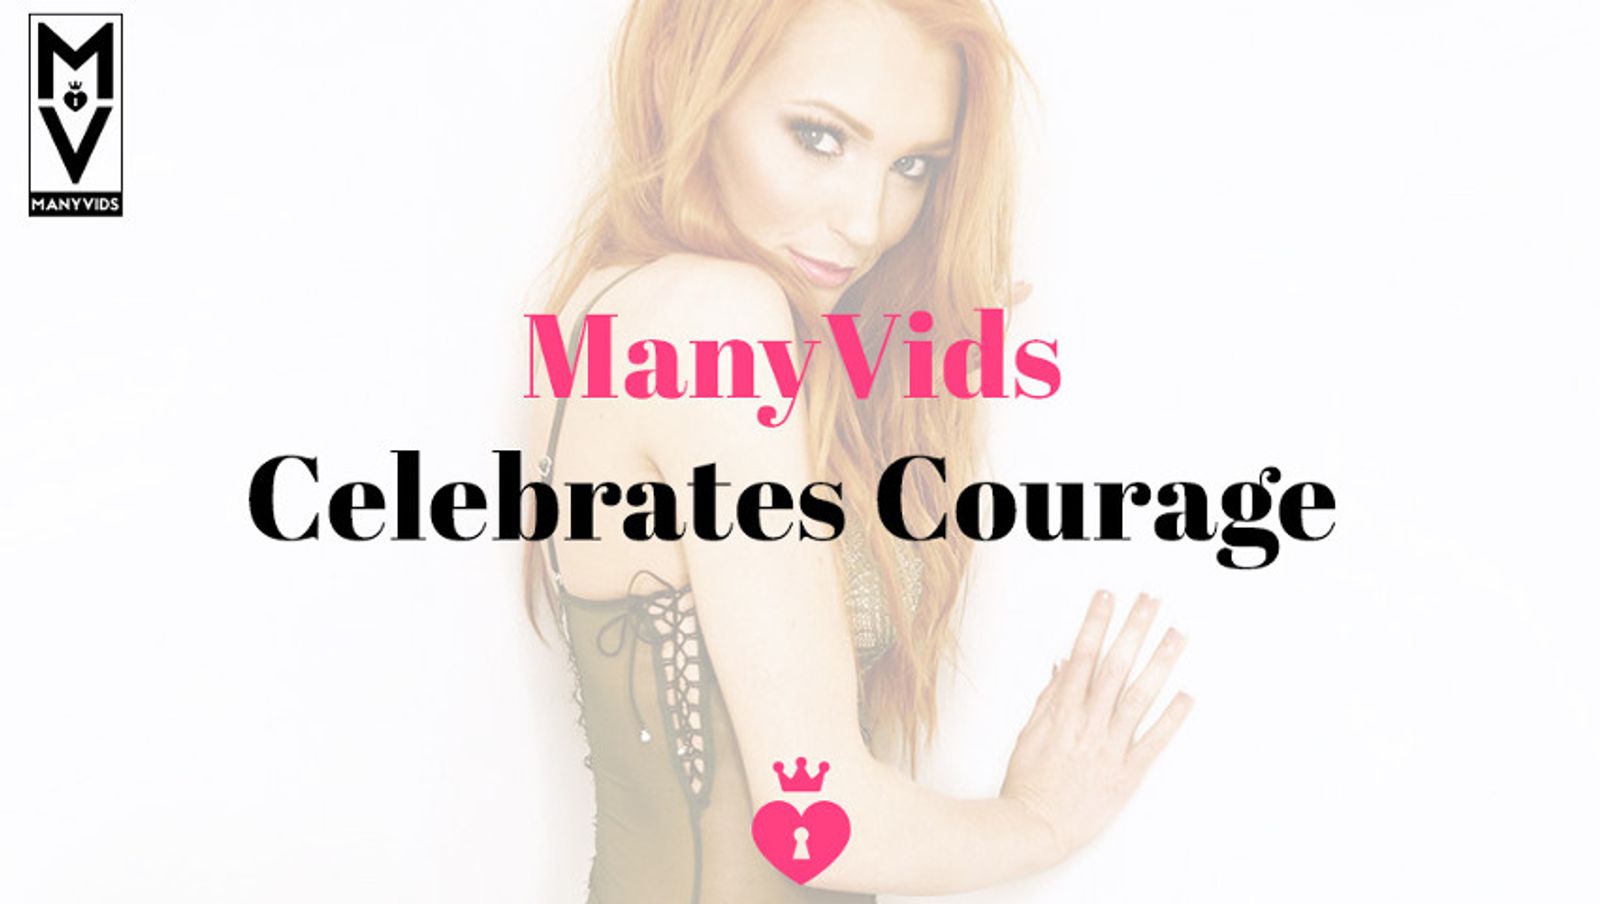 ManyVids Issues Statement in Support of Jenny Blighe